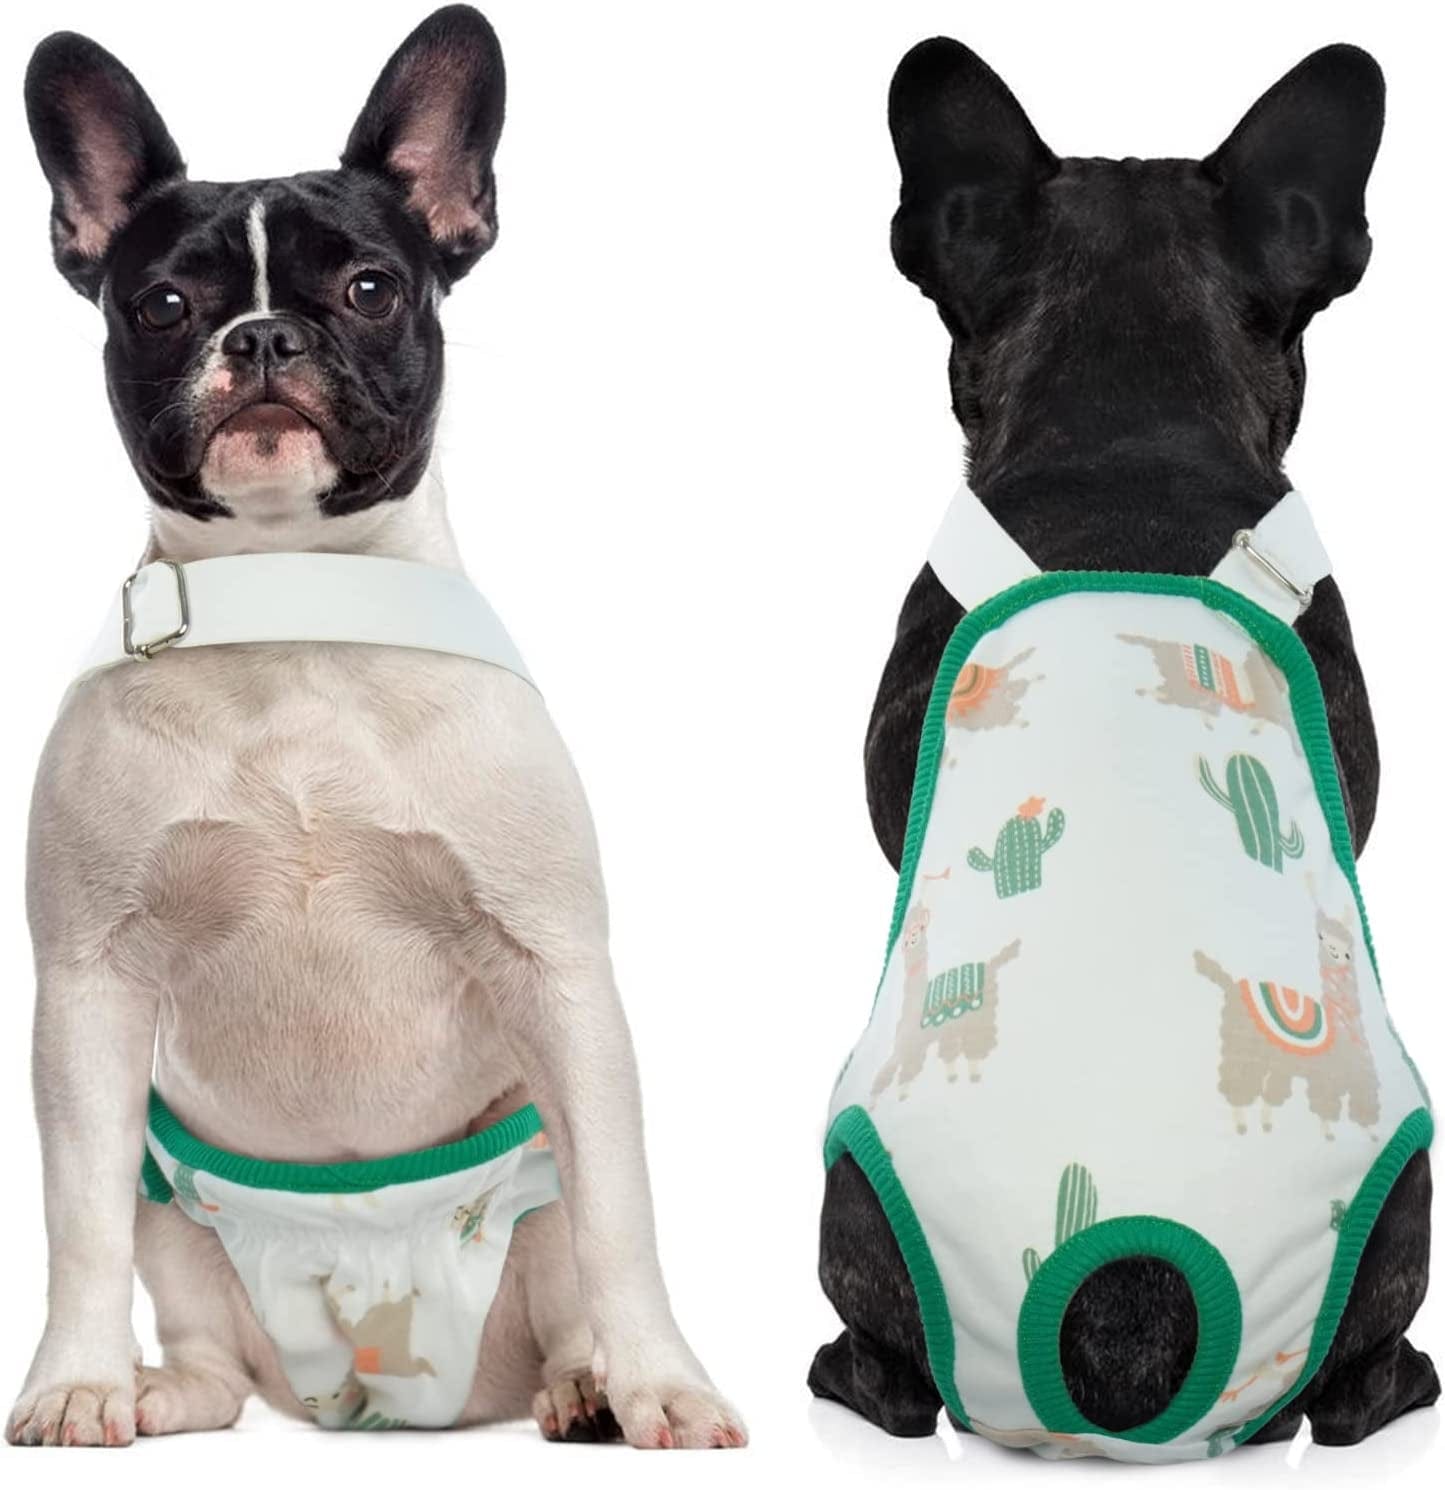 Reusable Physiological Diapers For Dogs And Cats Washable And Comfortable  Small Boxer Tulip Pants For Menstrual Stimulation And Period Support From  Dresscuten, $9.18